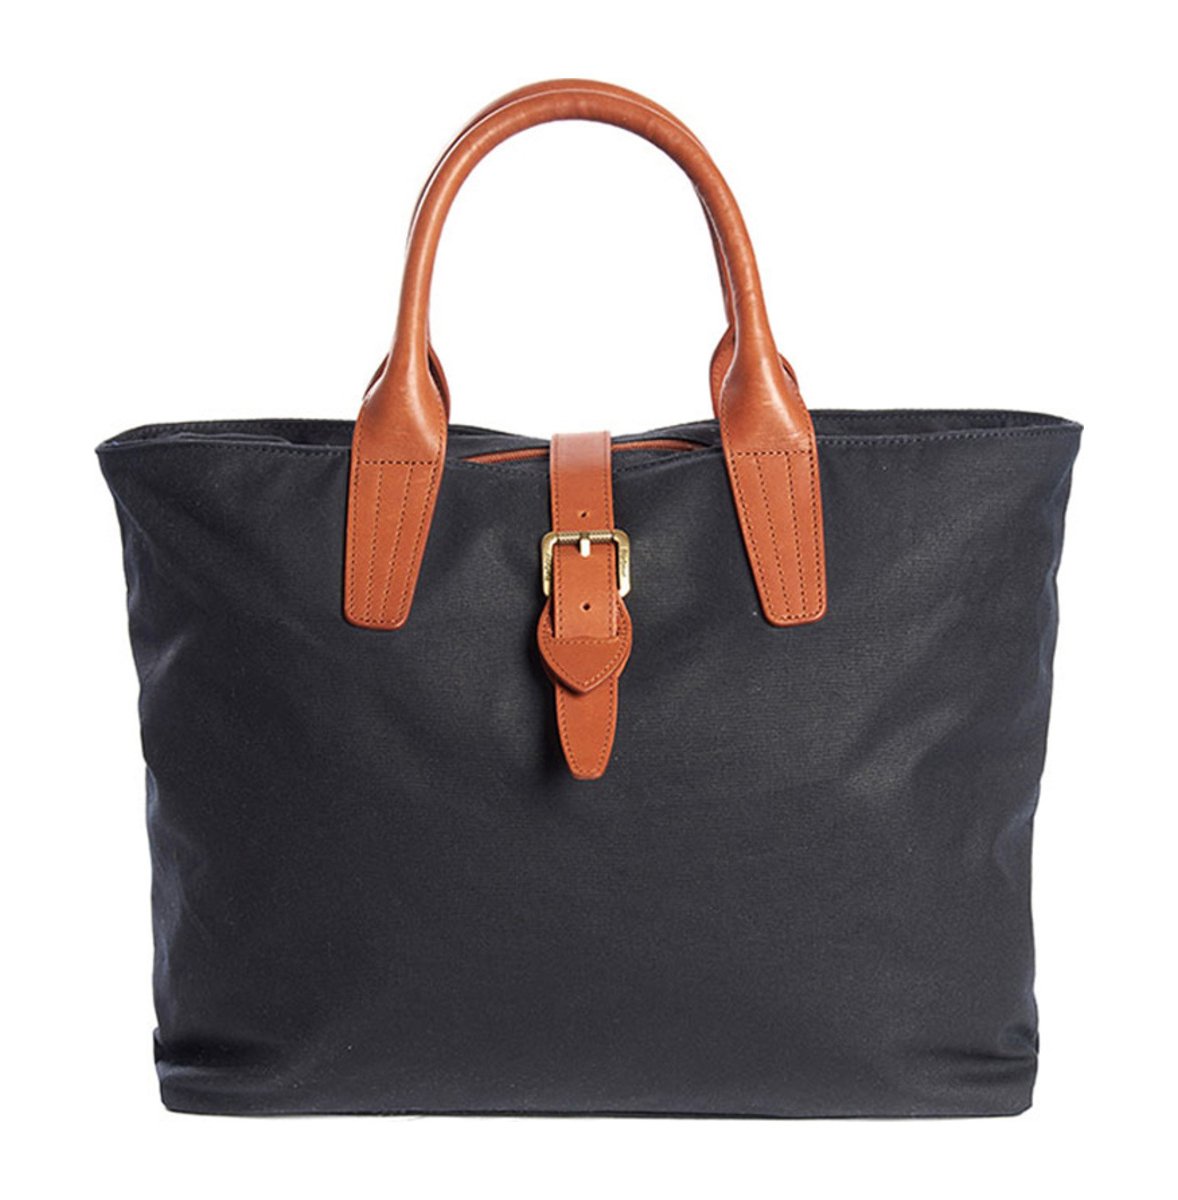 barbour leather tote bag